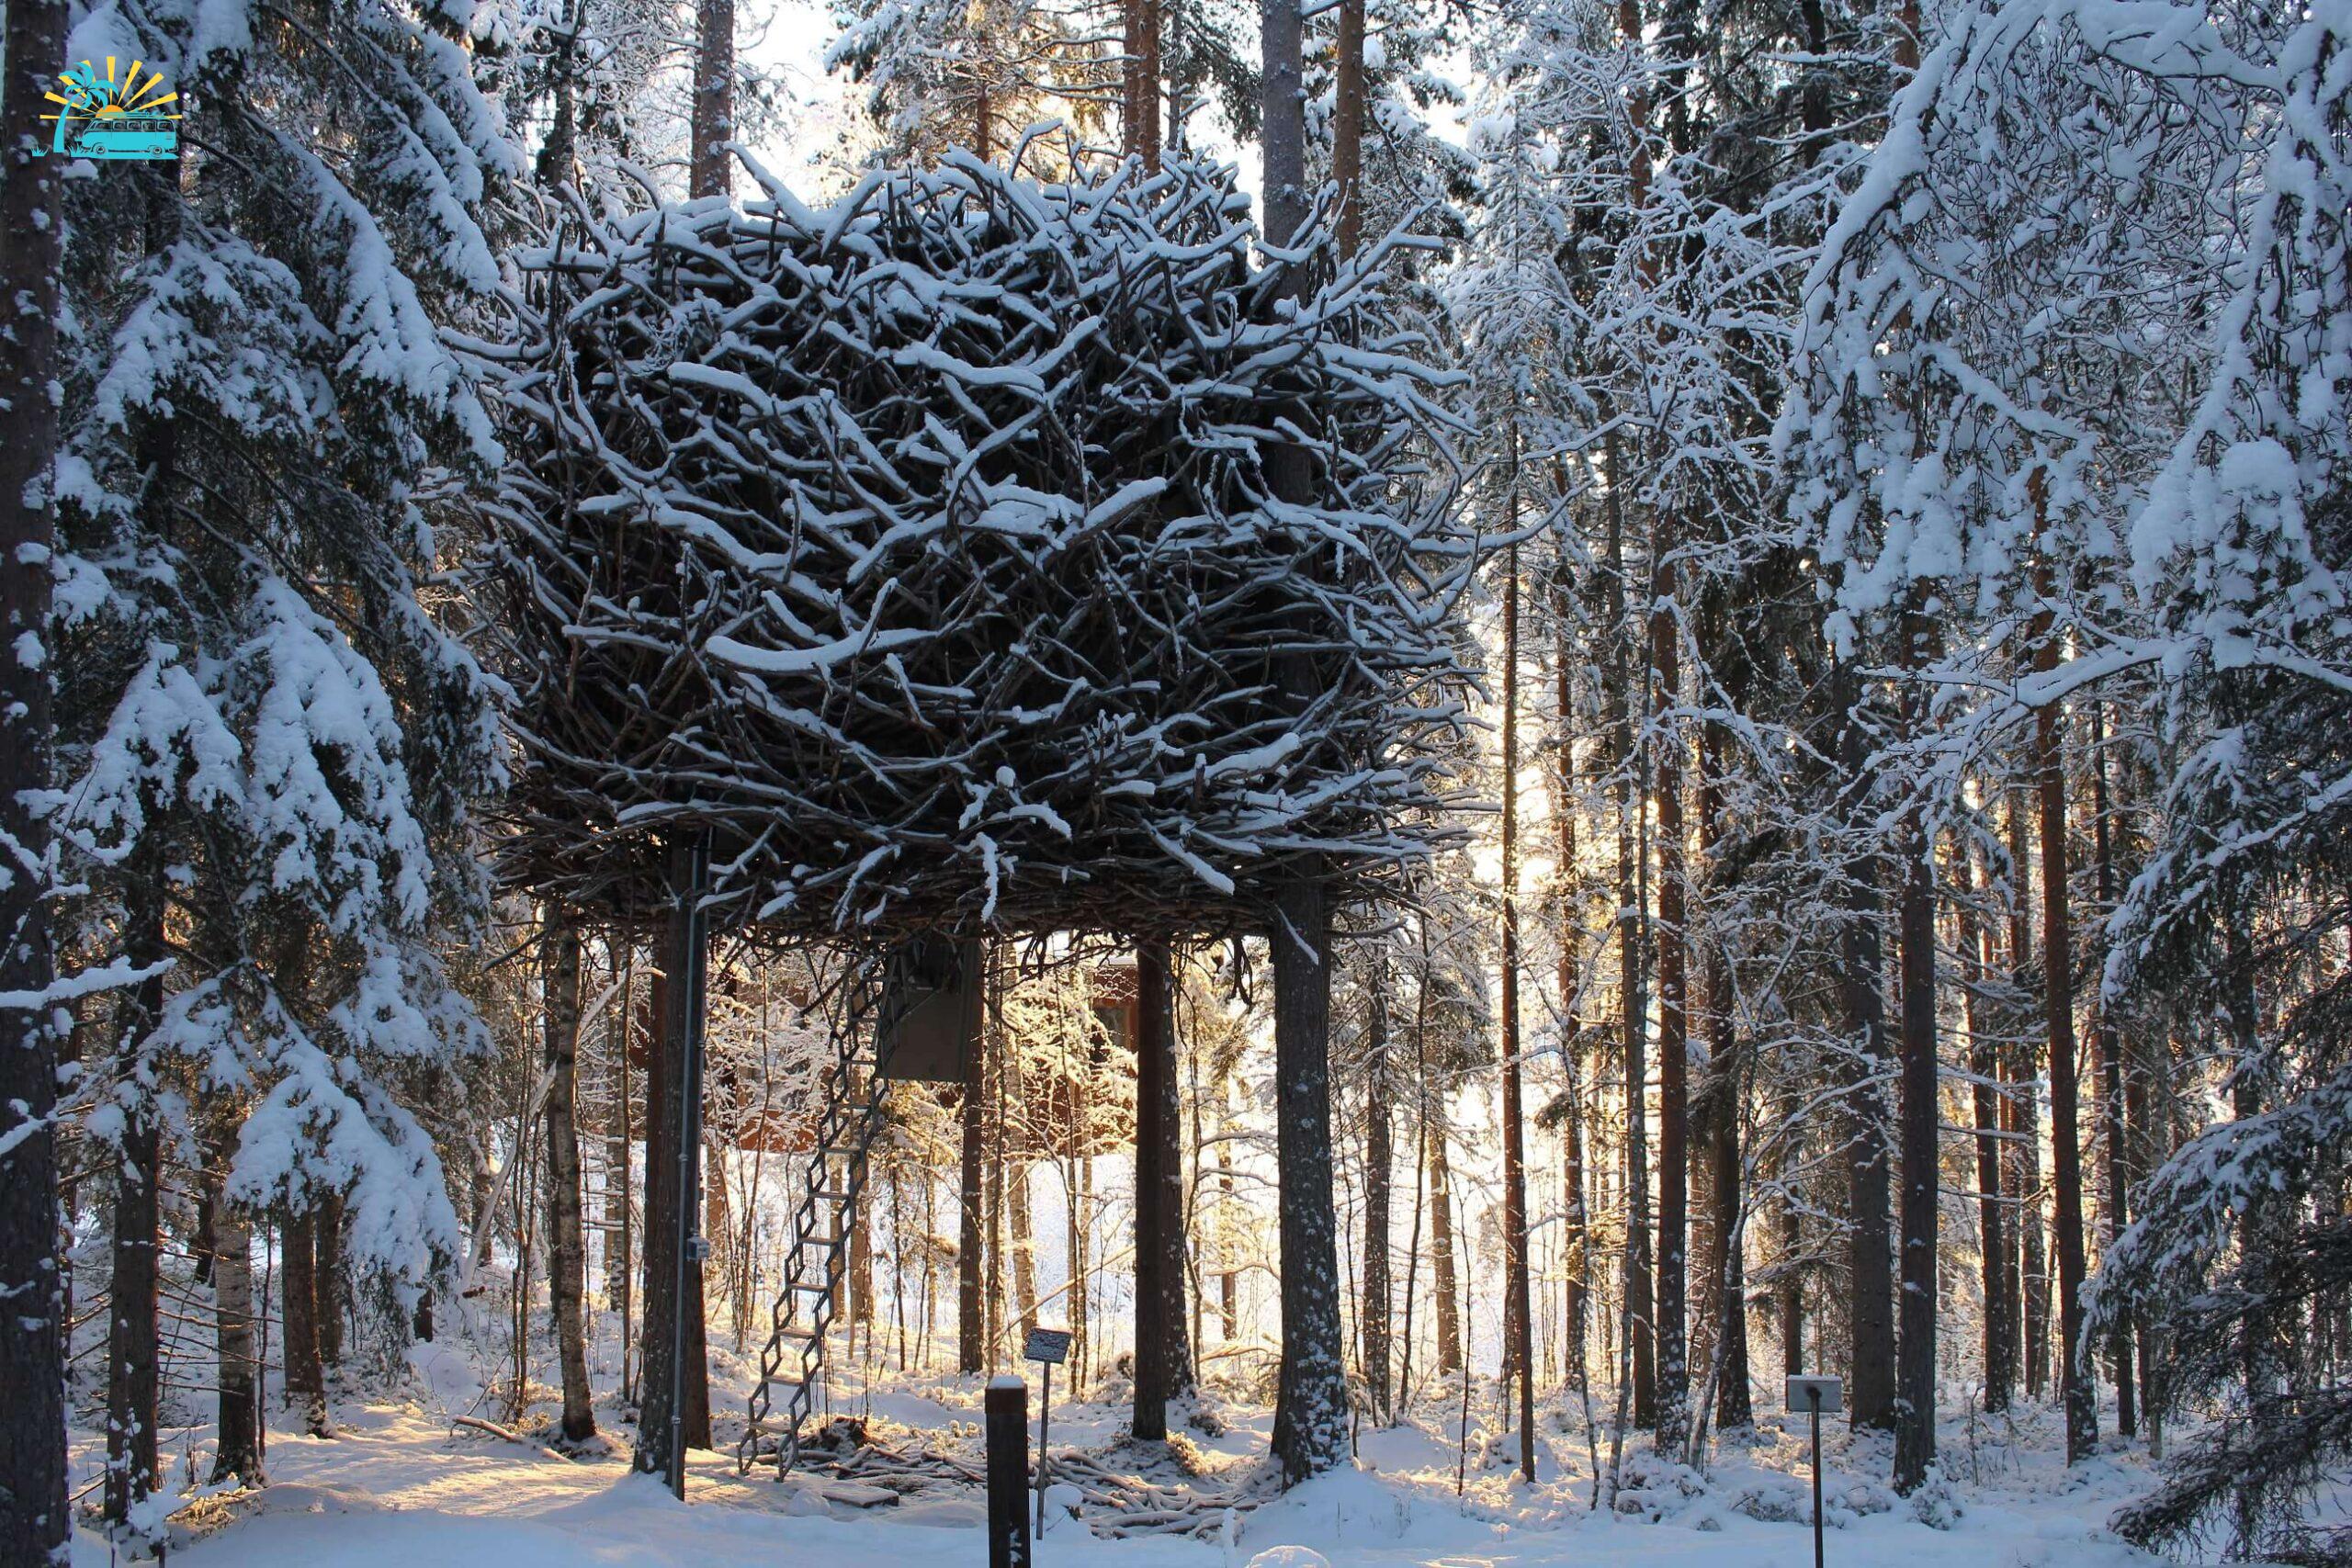 A beautiful view of Bird’s Nest Treehouse in Sweden covered in snow